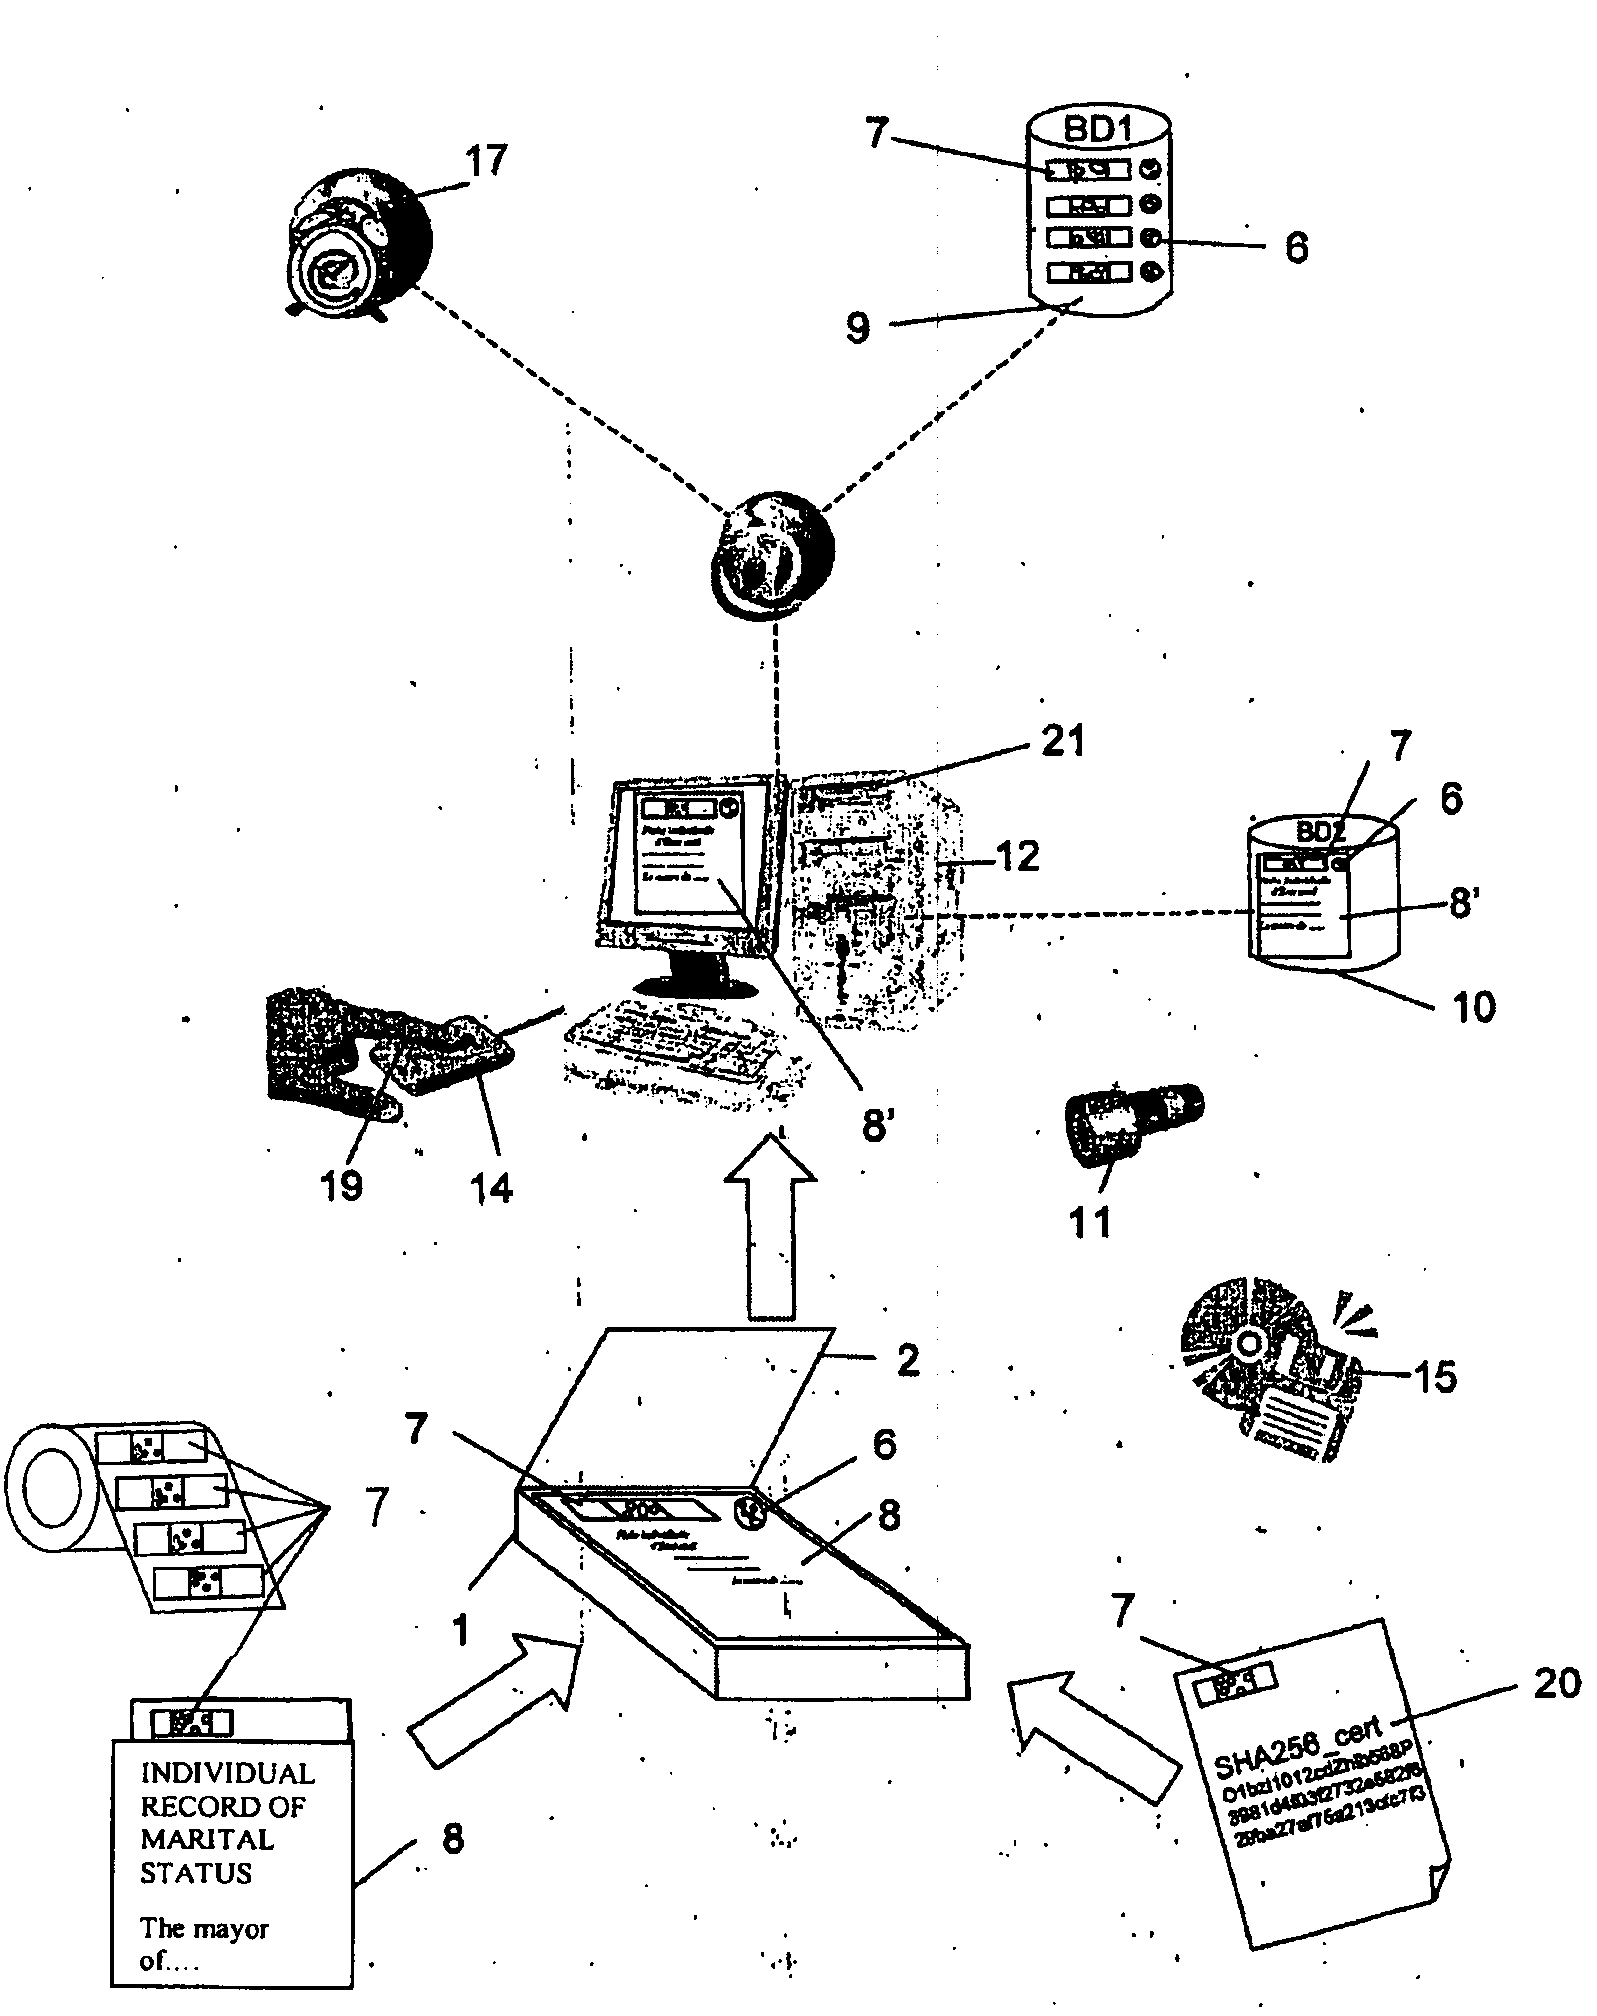 Method for Certifying and Subsequently Authenticating Original, Paper of Digital Documents for Evidences